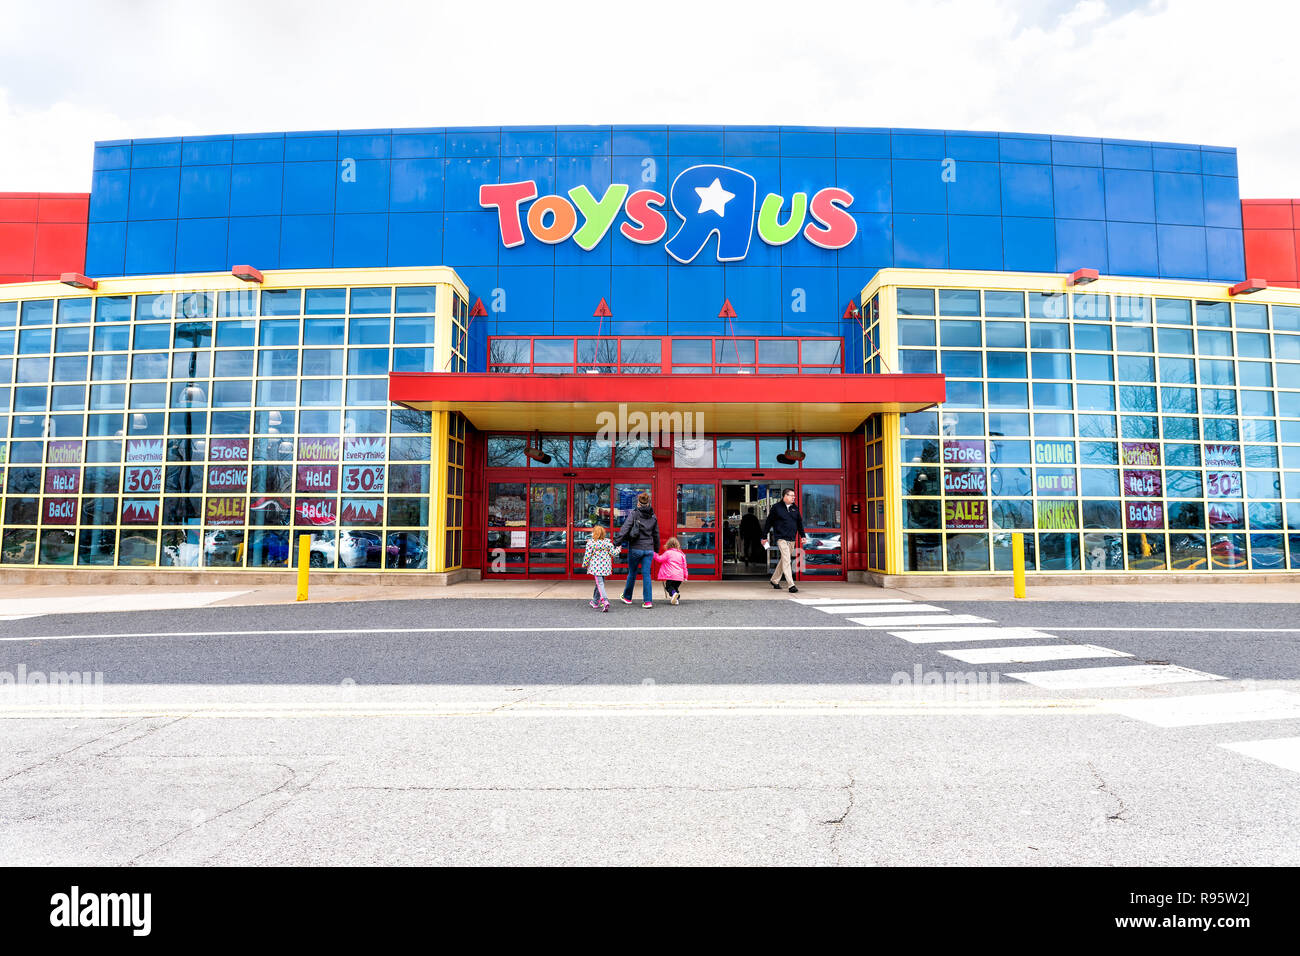 Toys R Us Building Exterior High Resolution Stock Photography and Images -  Alamy